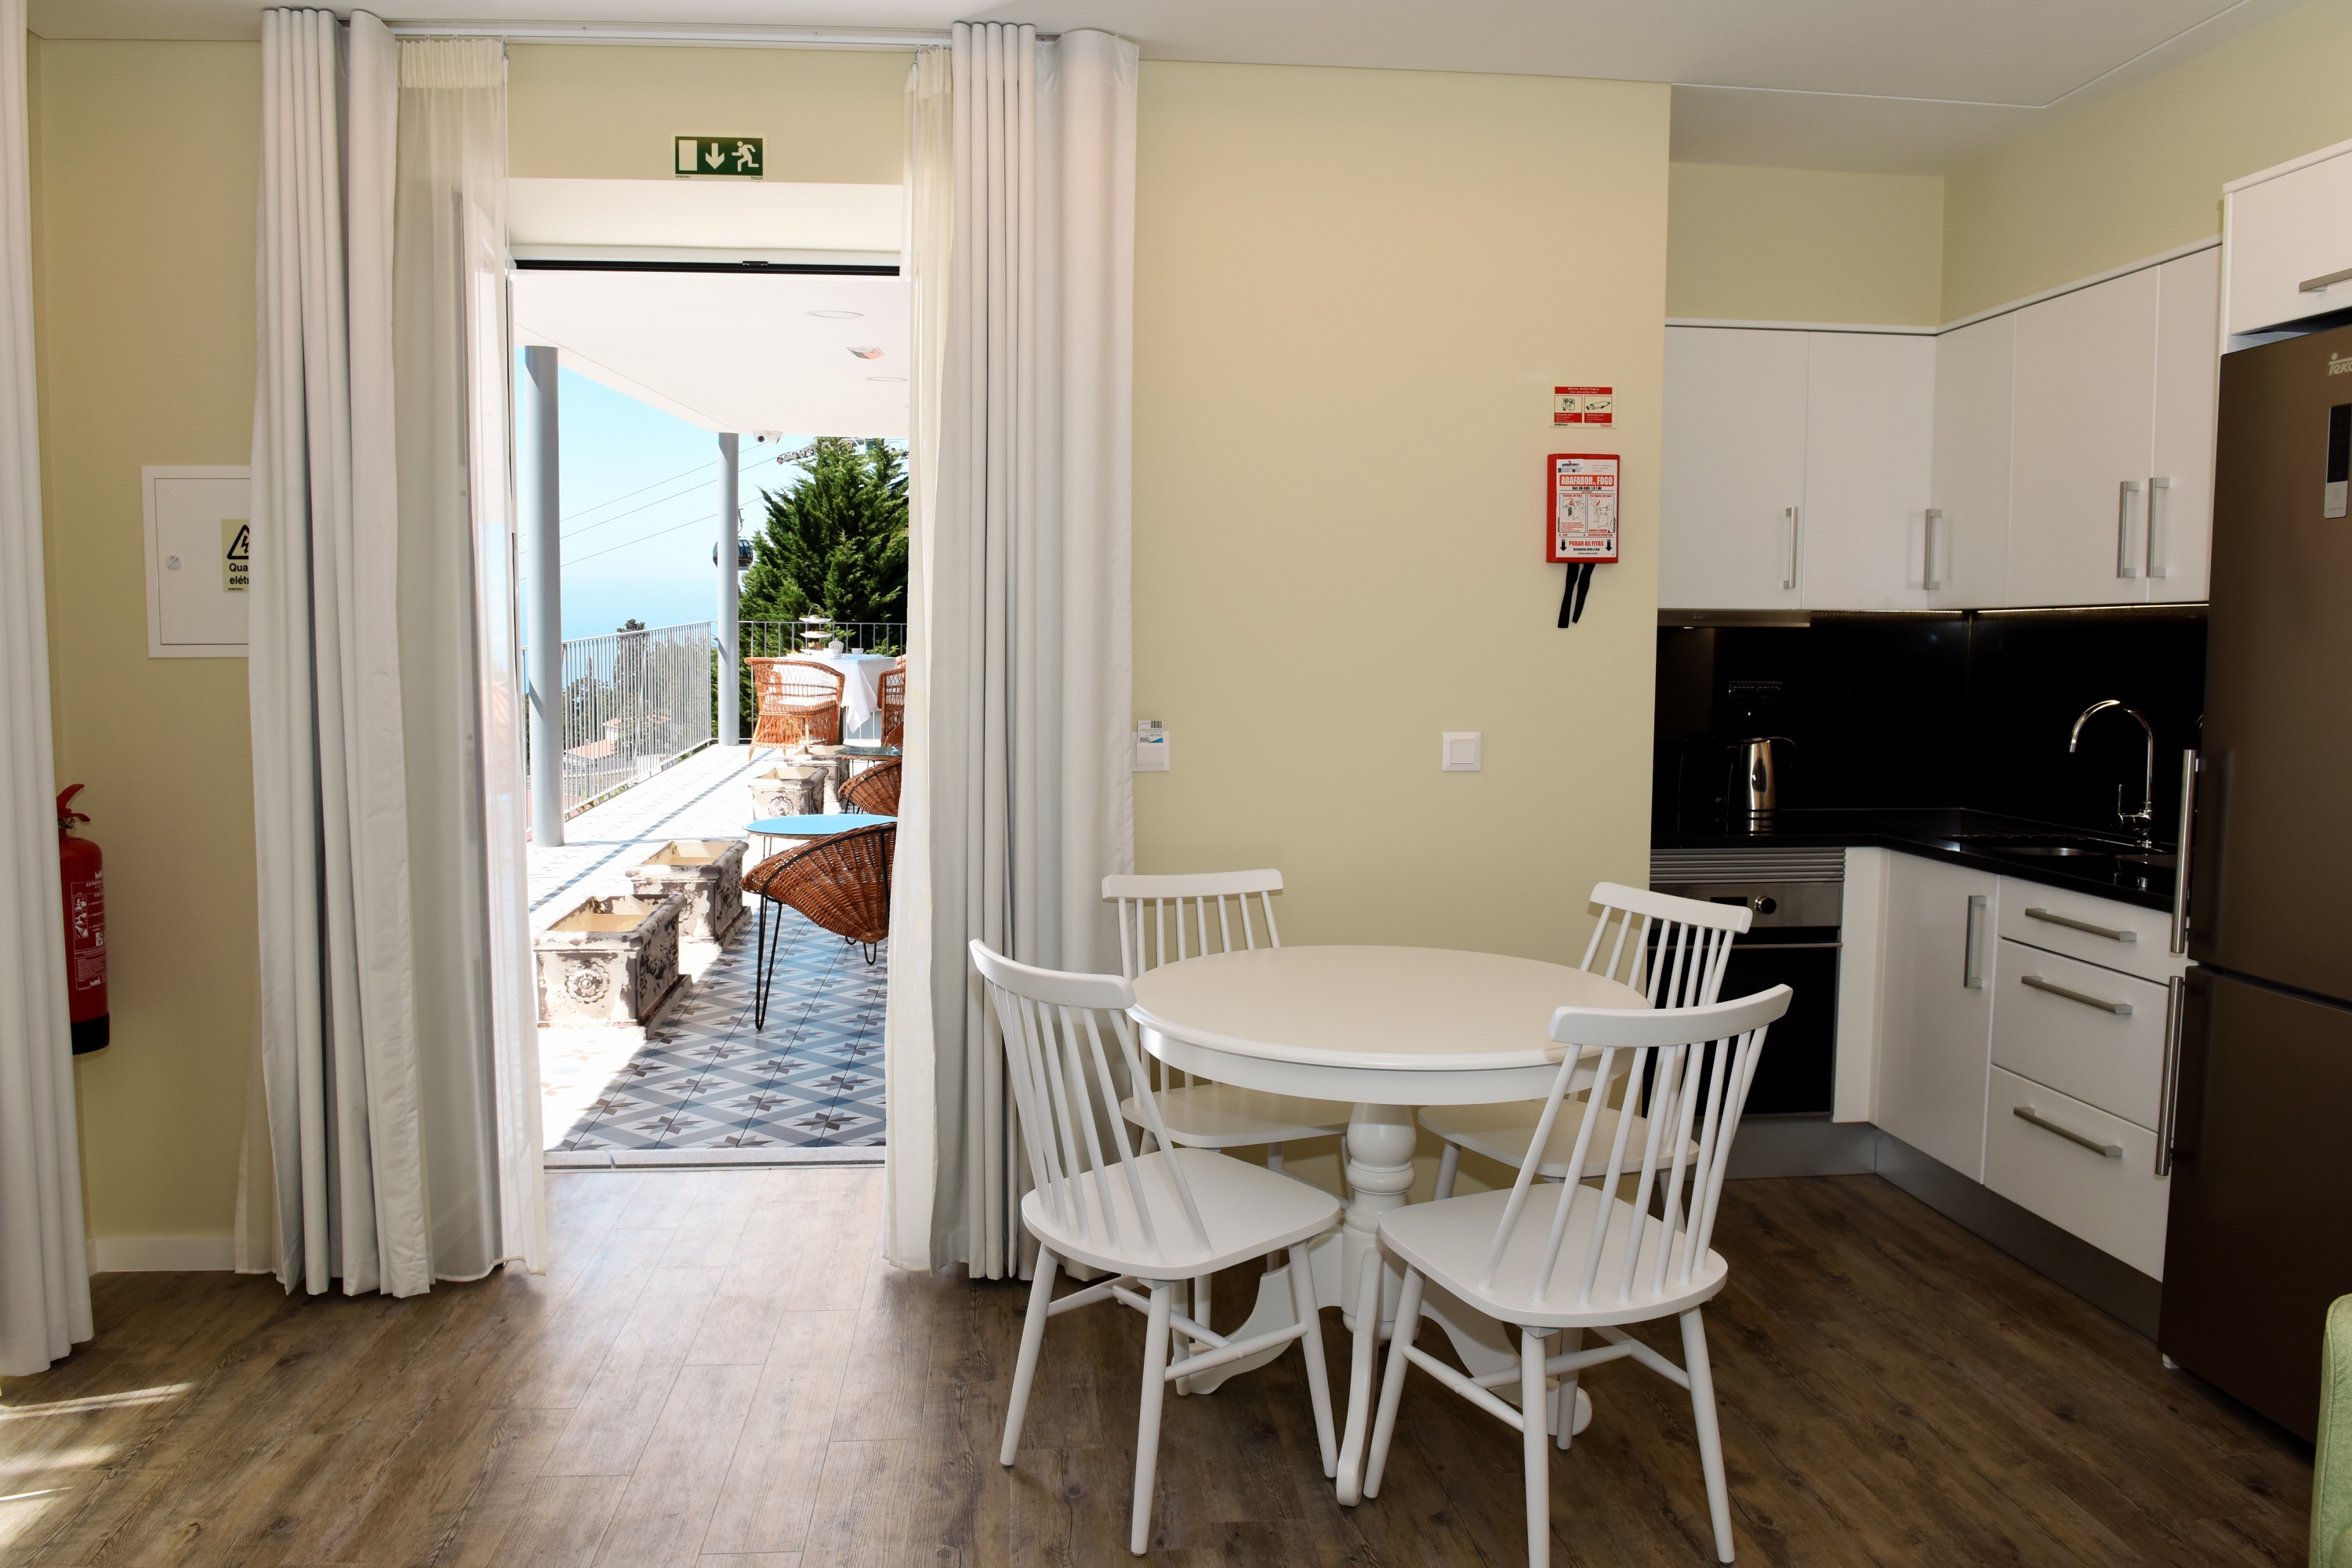 1-bed Superior Apartment in beautiful character Babosas Village Apartments - A2 1